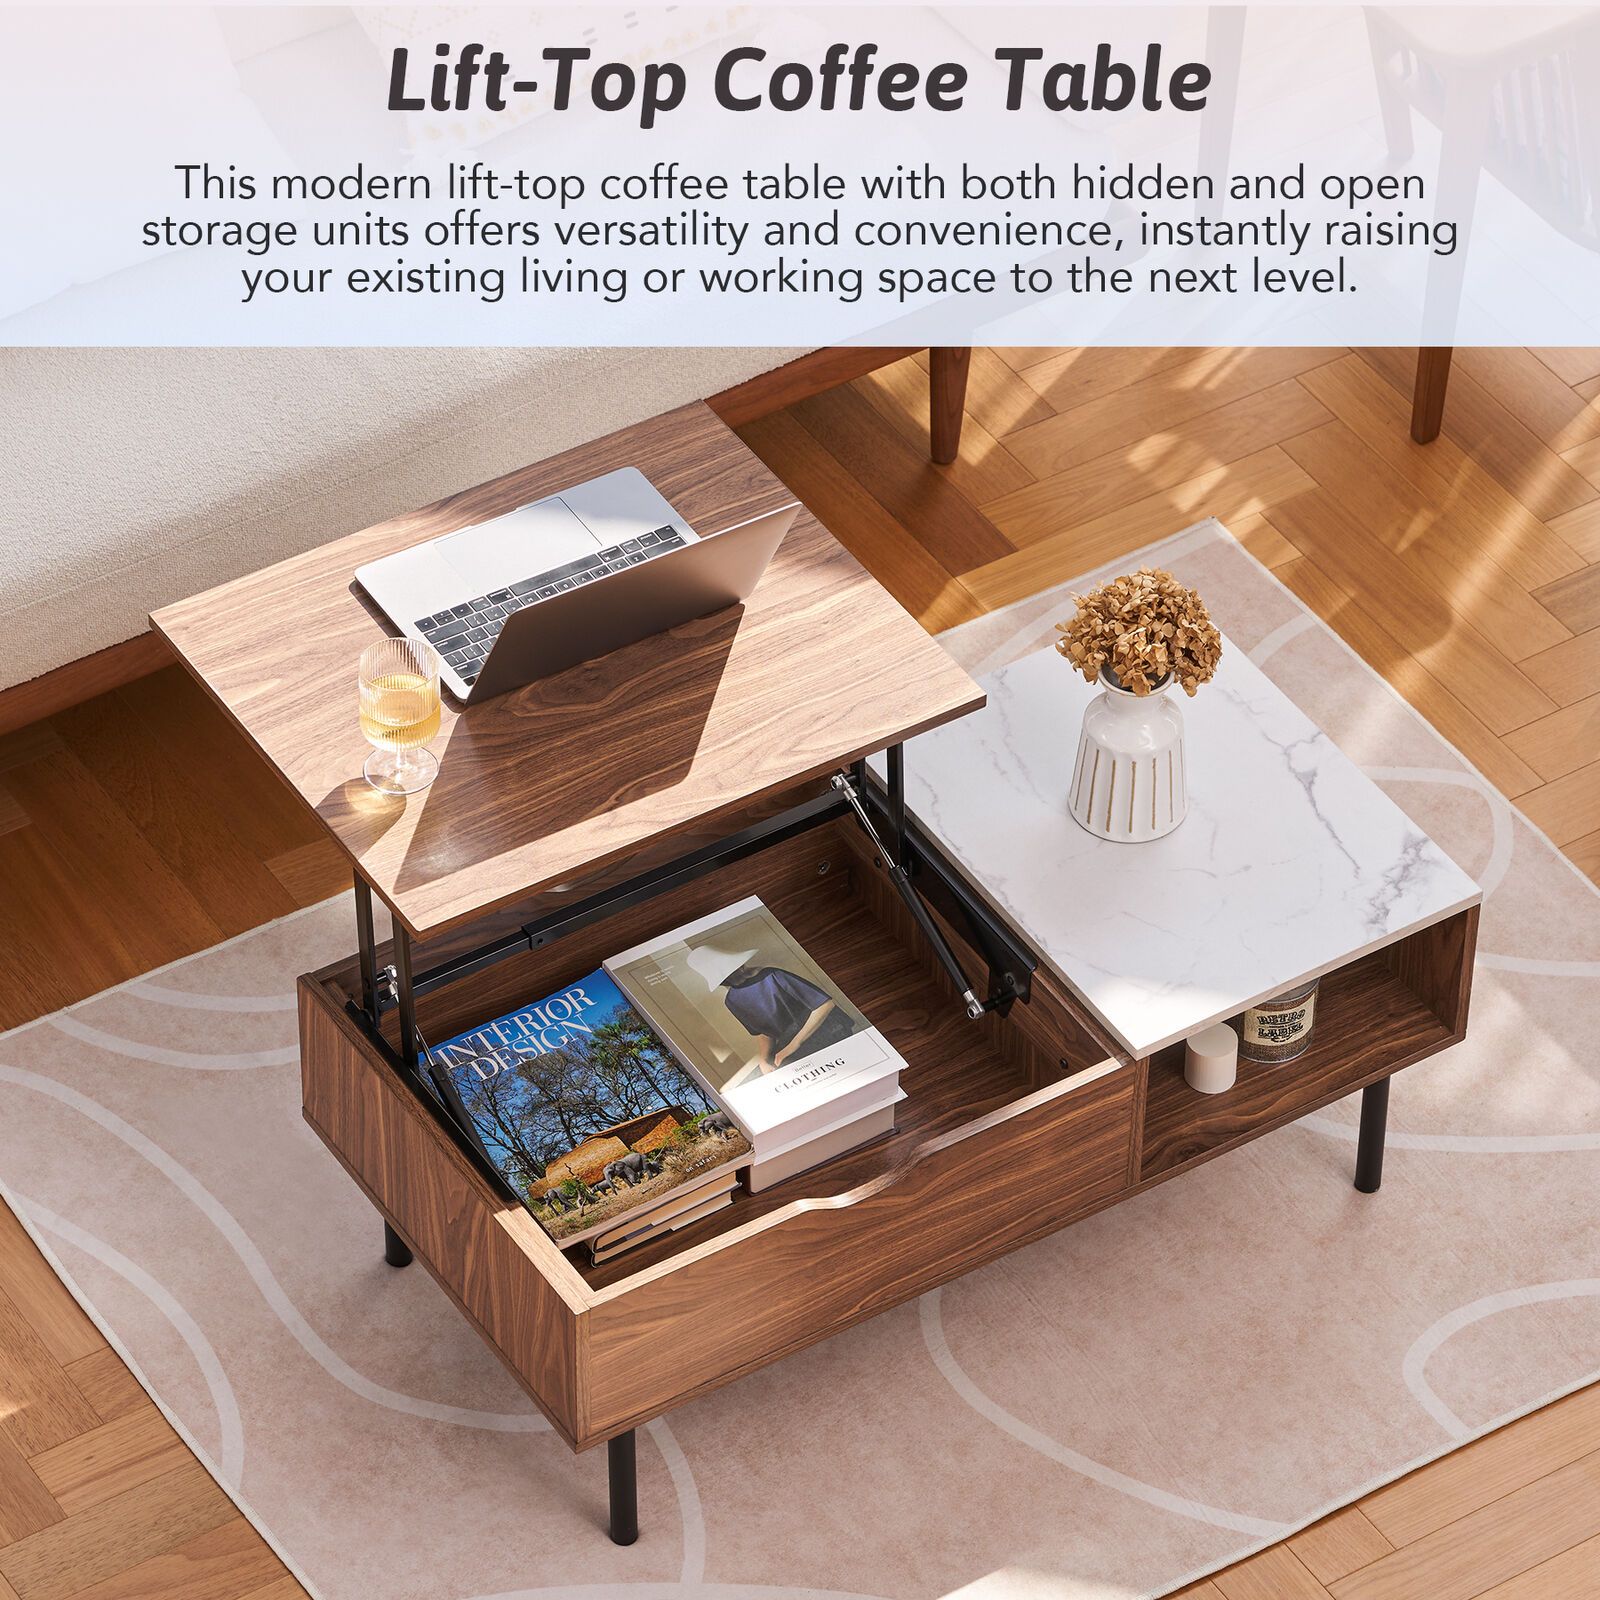 Lift Top Coffee Table With Hidden Storage And Side Drawer For Living Room |  Ebay For Lift Top Coffee Tables With Hidden Storage Compartments (Photo 5 of 15)